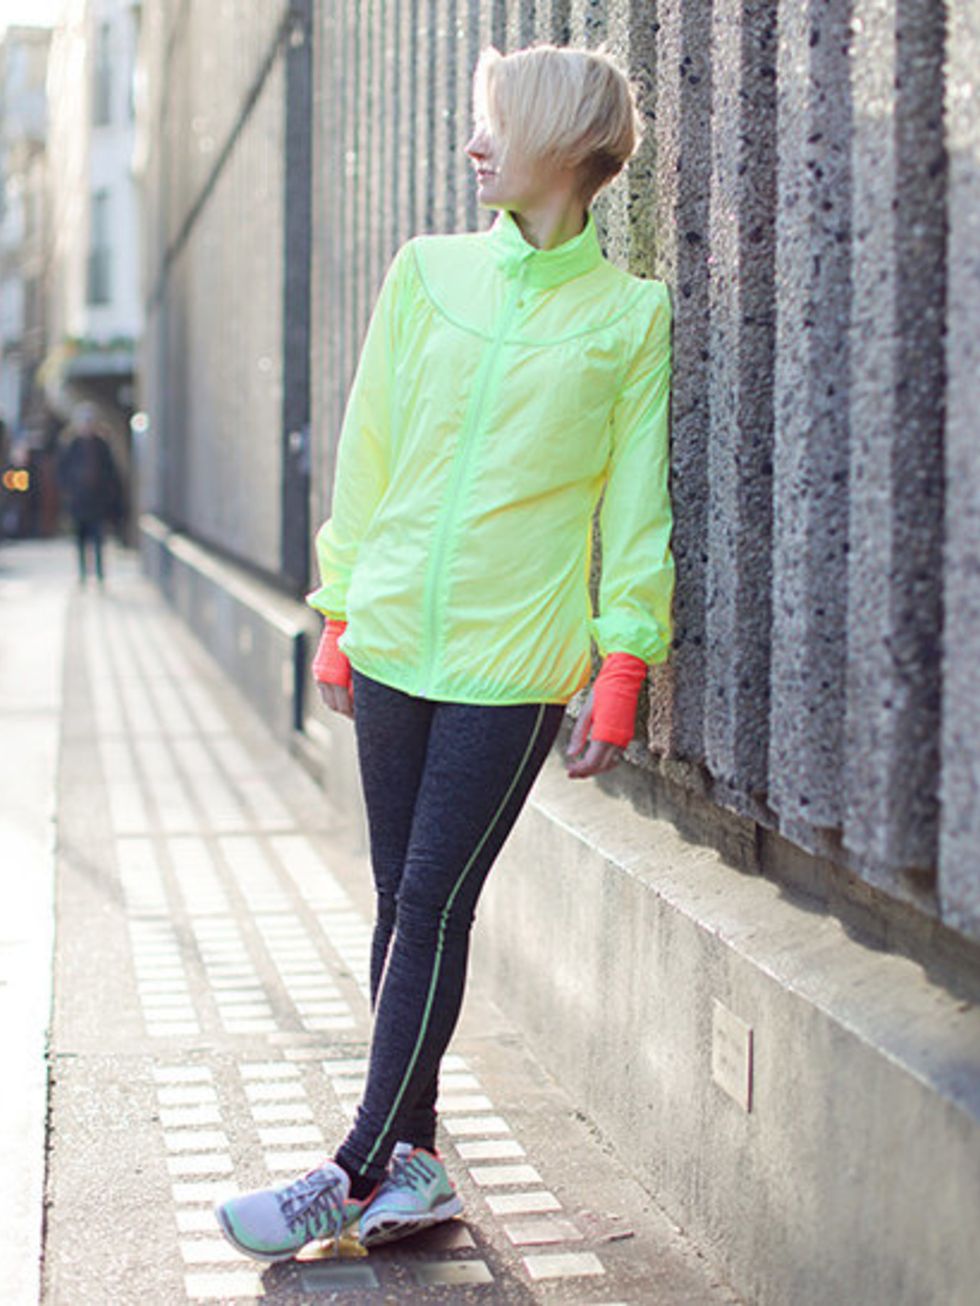 <p>Lorraine Candy, Editor-in-Chief</p><p><a href="http://www.sweatybetty.com/">All kit by Sweaty Betty</a>.</p><p><a href="http://www.nike.com/gb/en_gb/?cp=EUNS_KW_UK_1_Brand_Core">Trainers by Nike.</a></p>